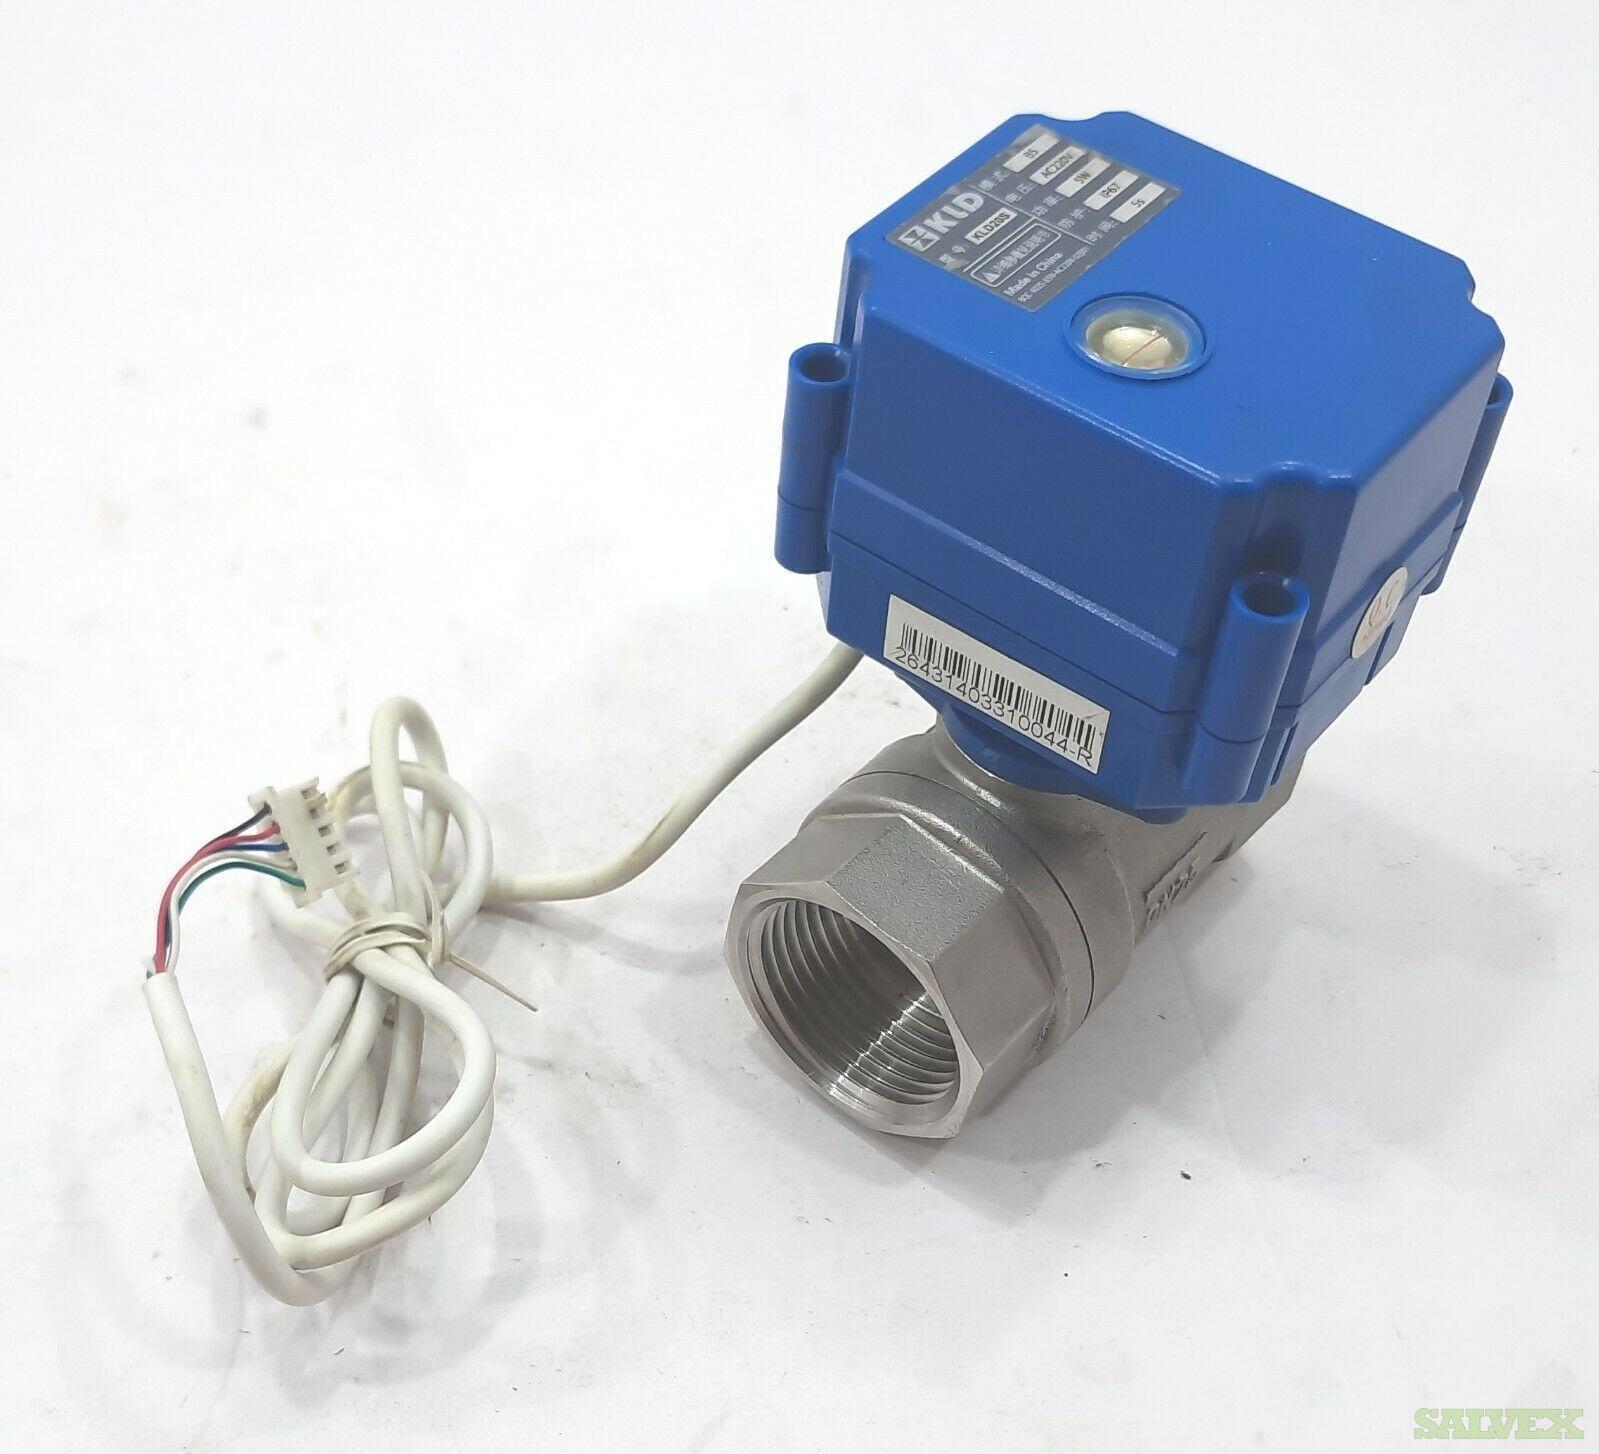 KLD KLD20S Electric Shut off Mini 2-way Motorized Ball Valve Automatic Control (5,000 Units) in Mississippi